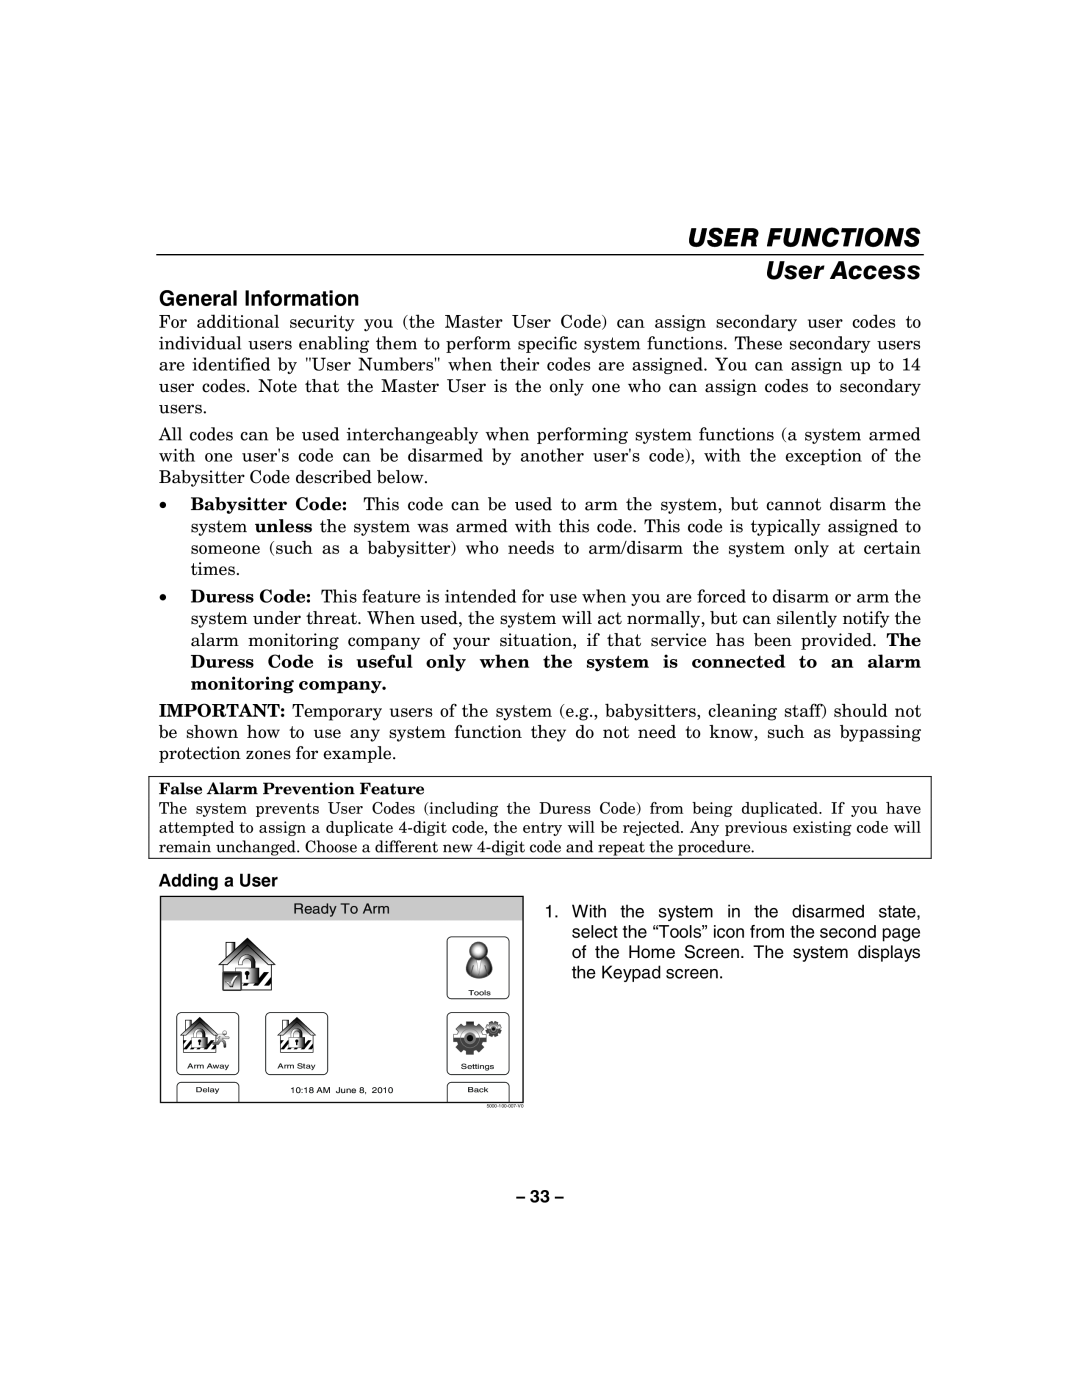 Honeywell 800-06894 manual USER FUNCTIONS User Access, General Information, Adding a User 